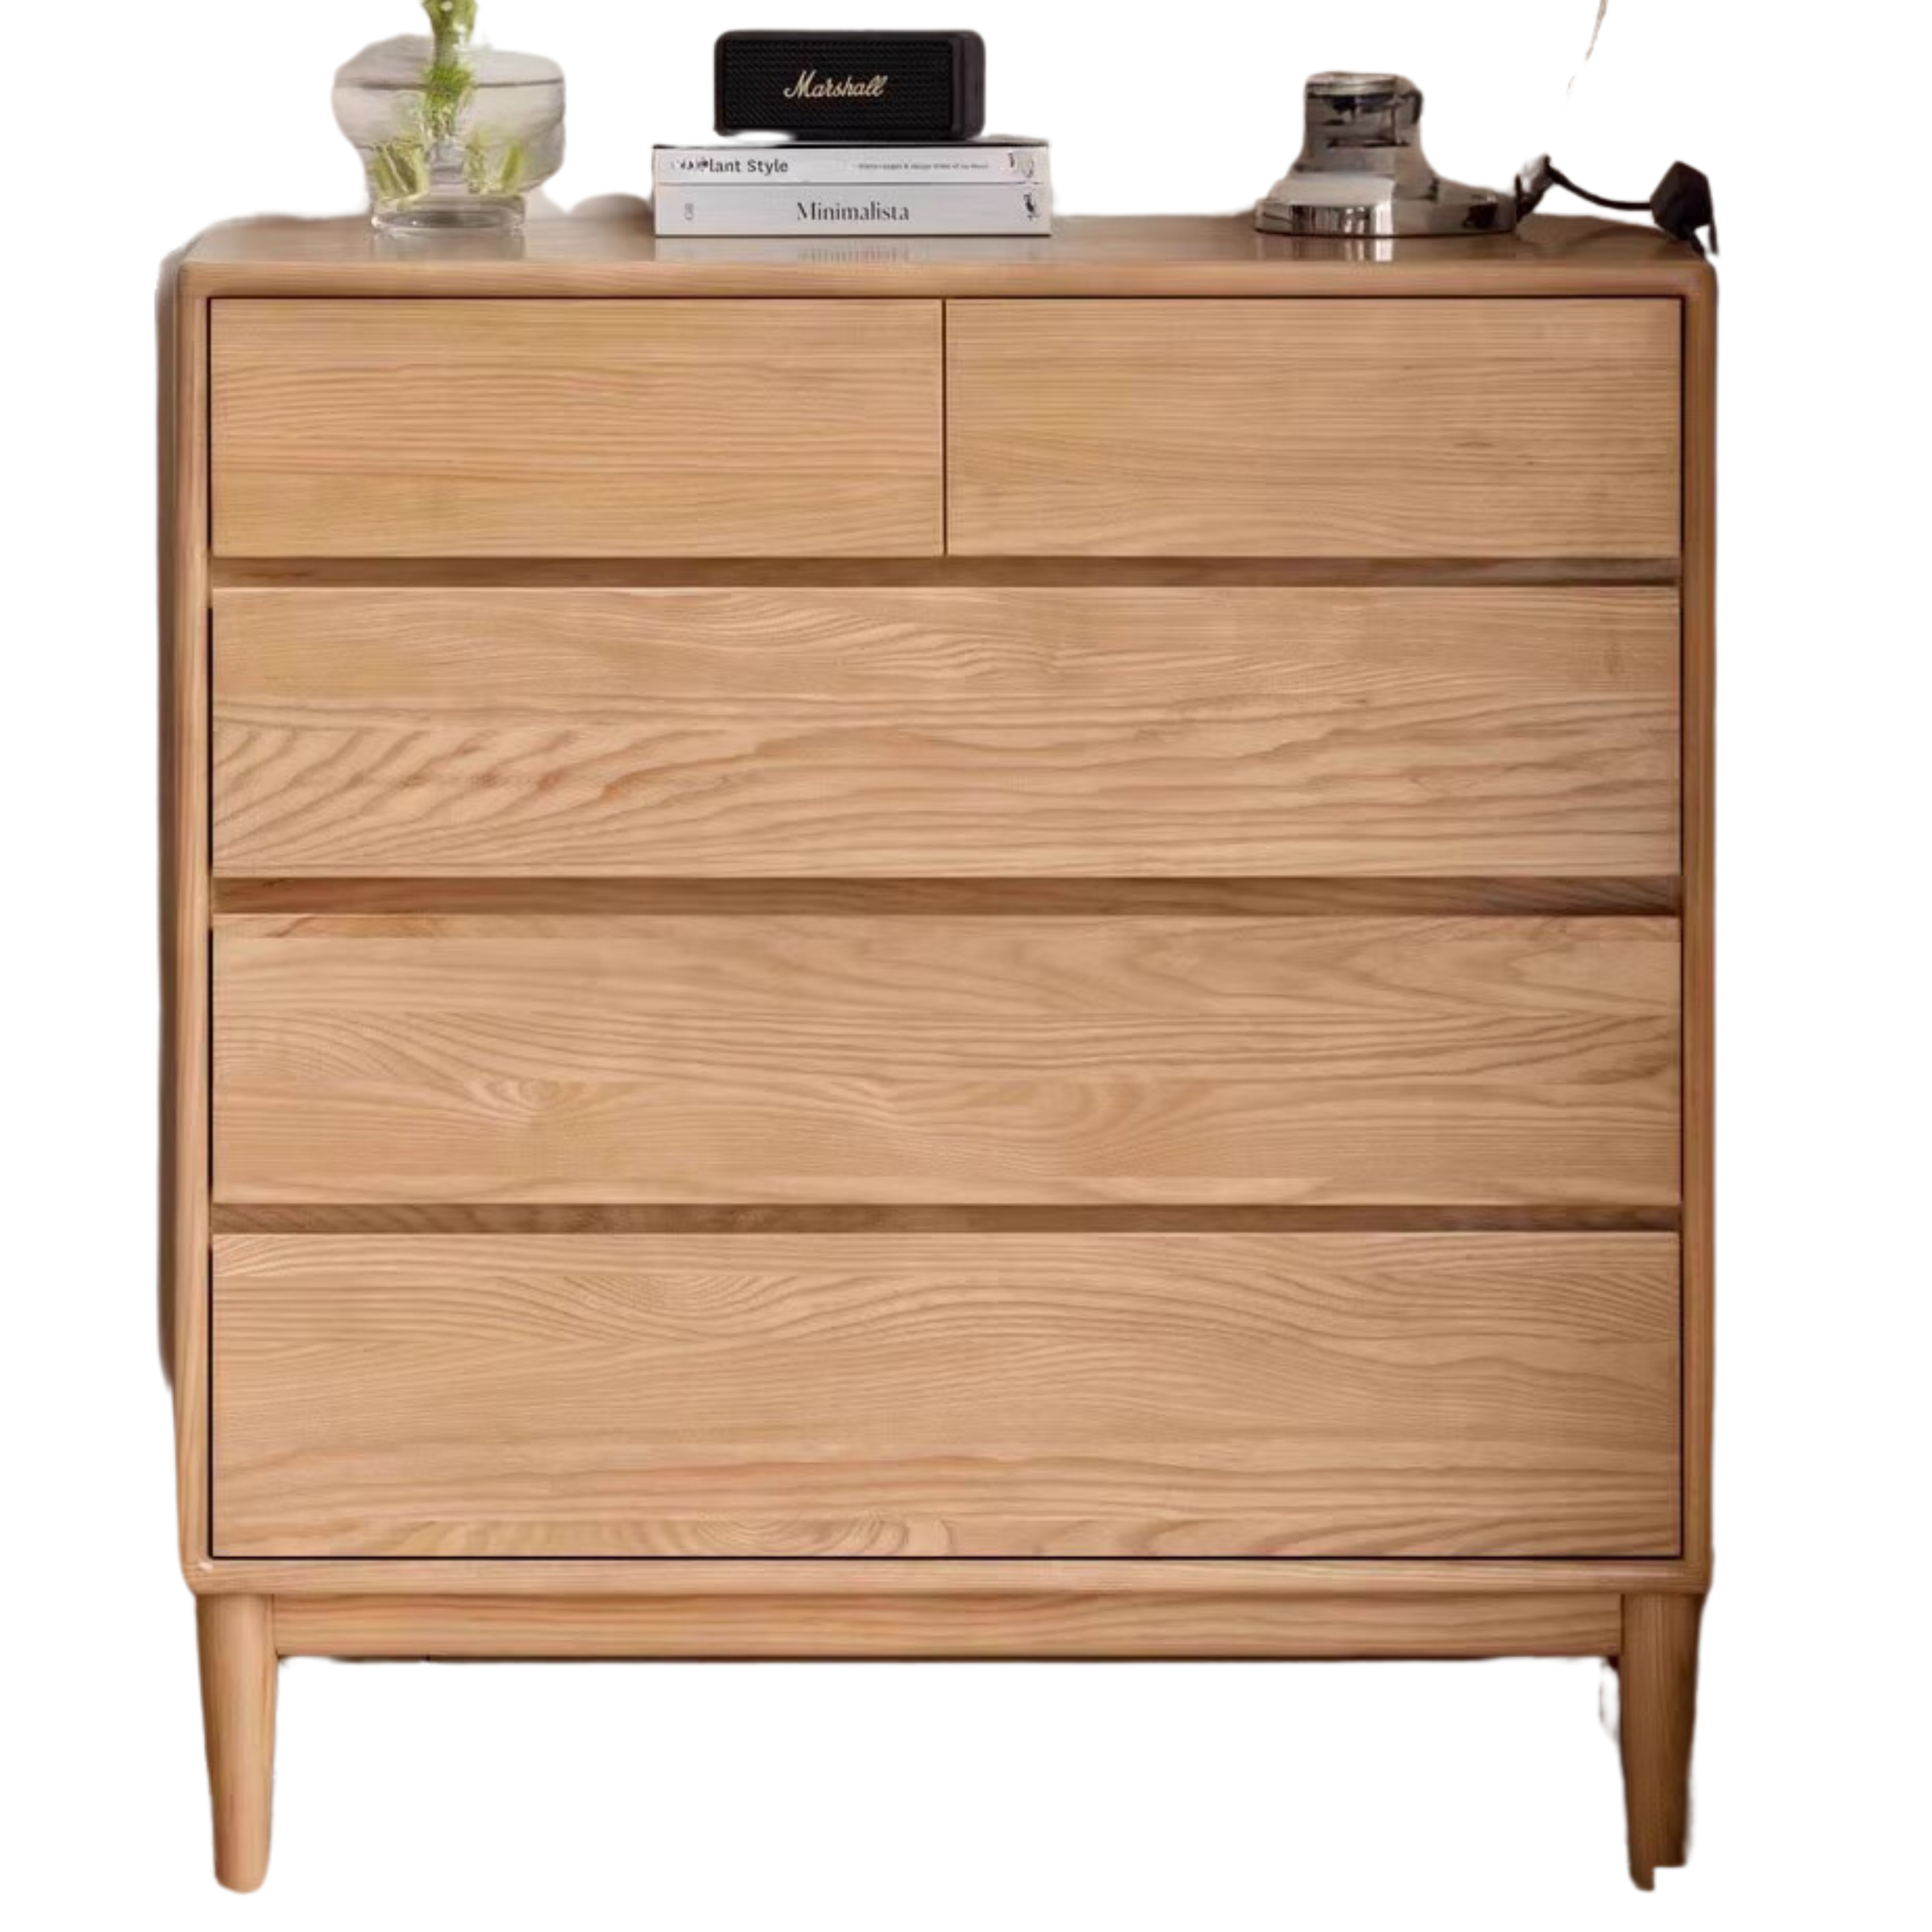 Ash Solid Wood chest of drawers Storage Drawer Cabinet)